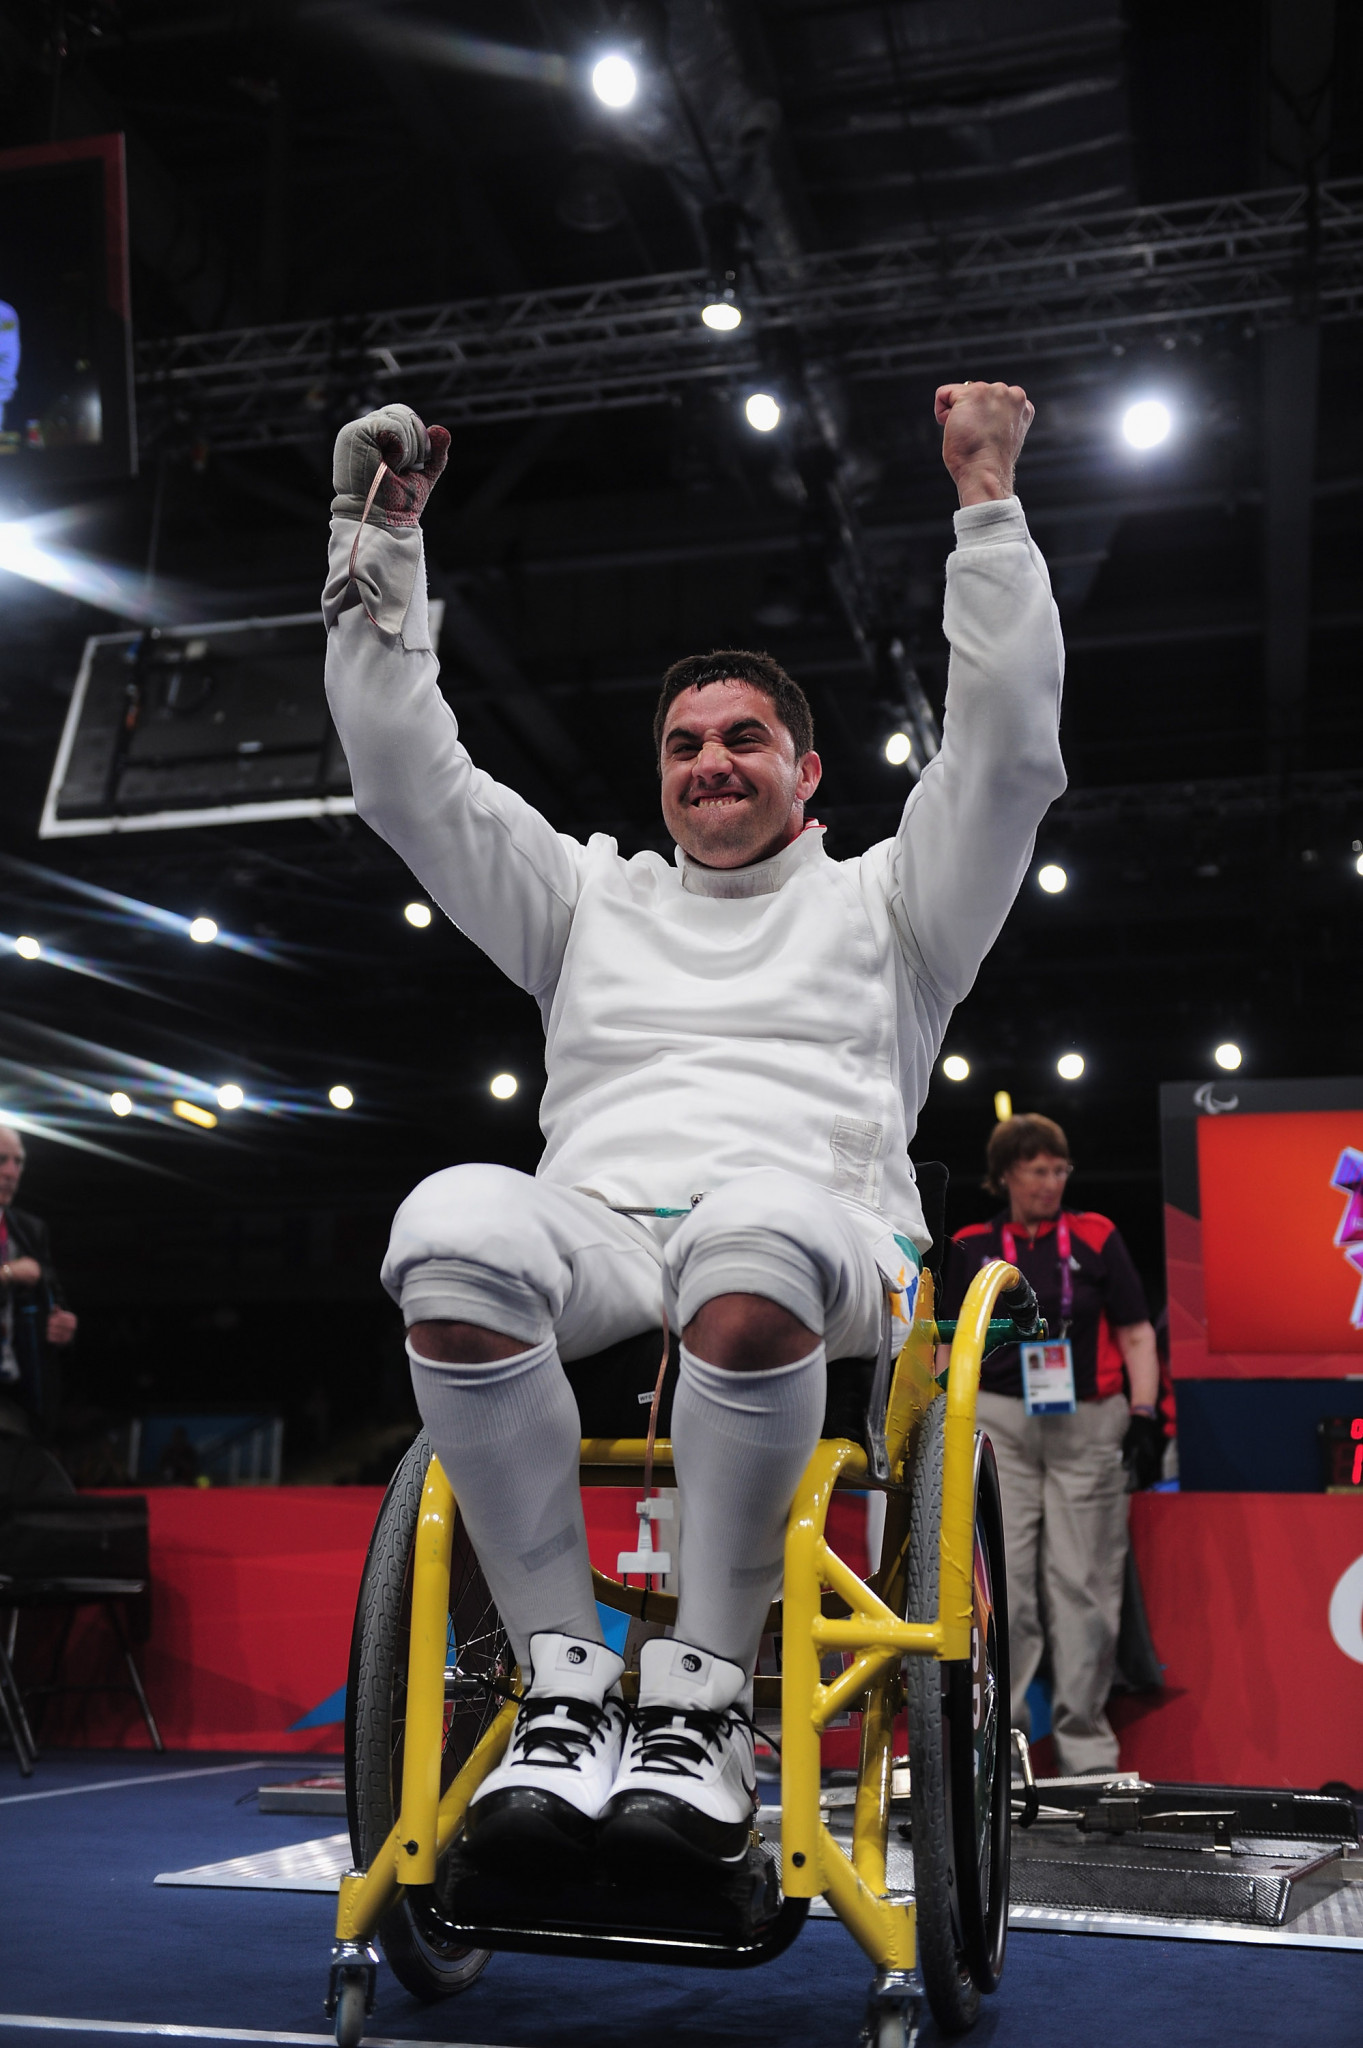 Home athlete Jovane Guissone will be among those eager to leave their mark on the competition when the latest event on the 2019 IWAS Wheelchair Fencing World Cup tour takes place in São Paulo over the coming four days ©Getty Images